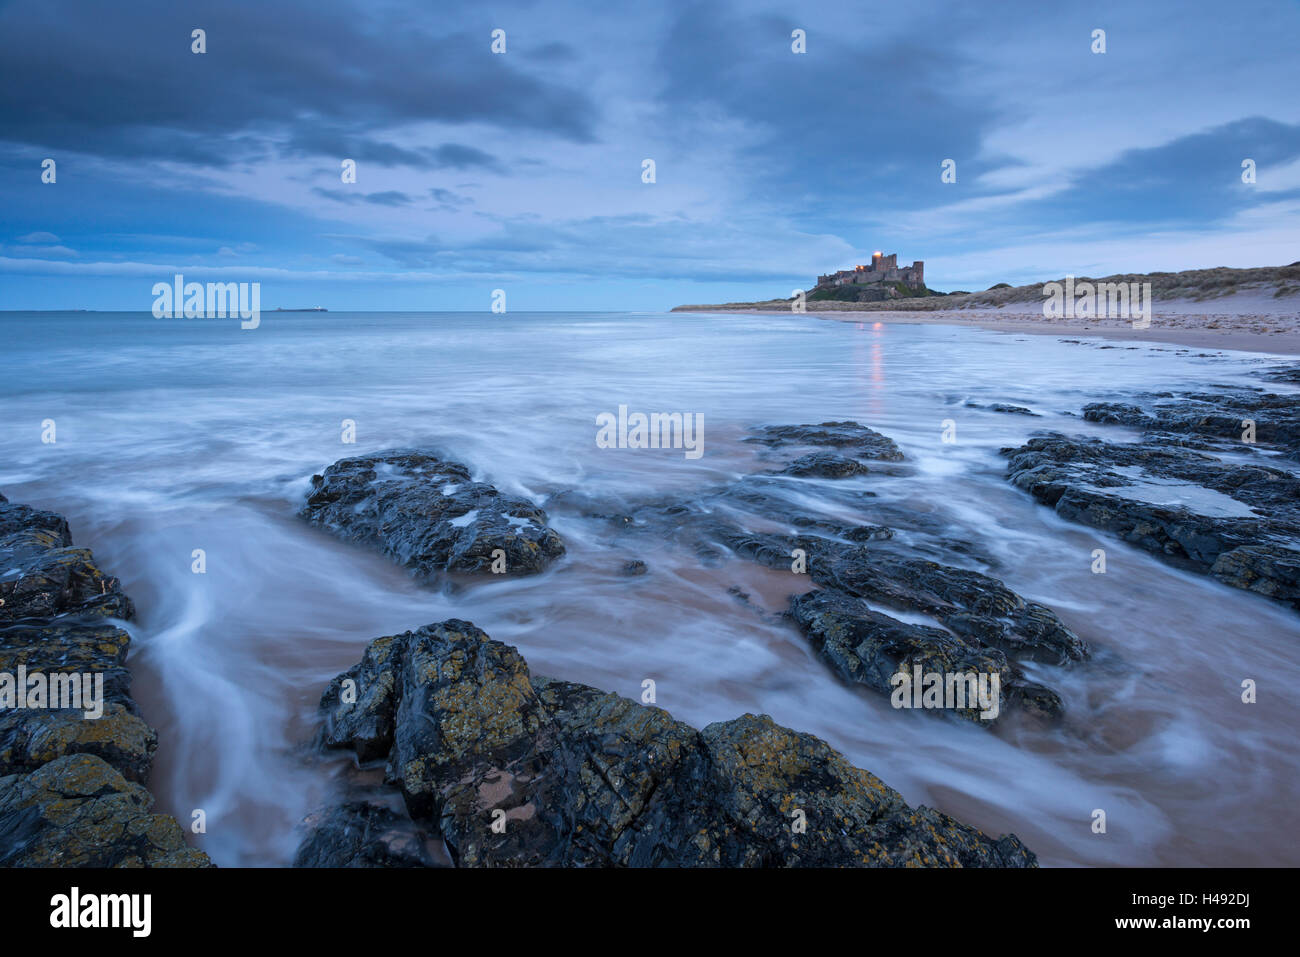 Stormy evening on the beach near Bamburgh Castle, Northumberland, England. Winter (March) 2014. Stock Photo